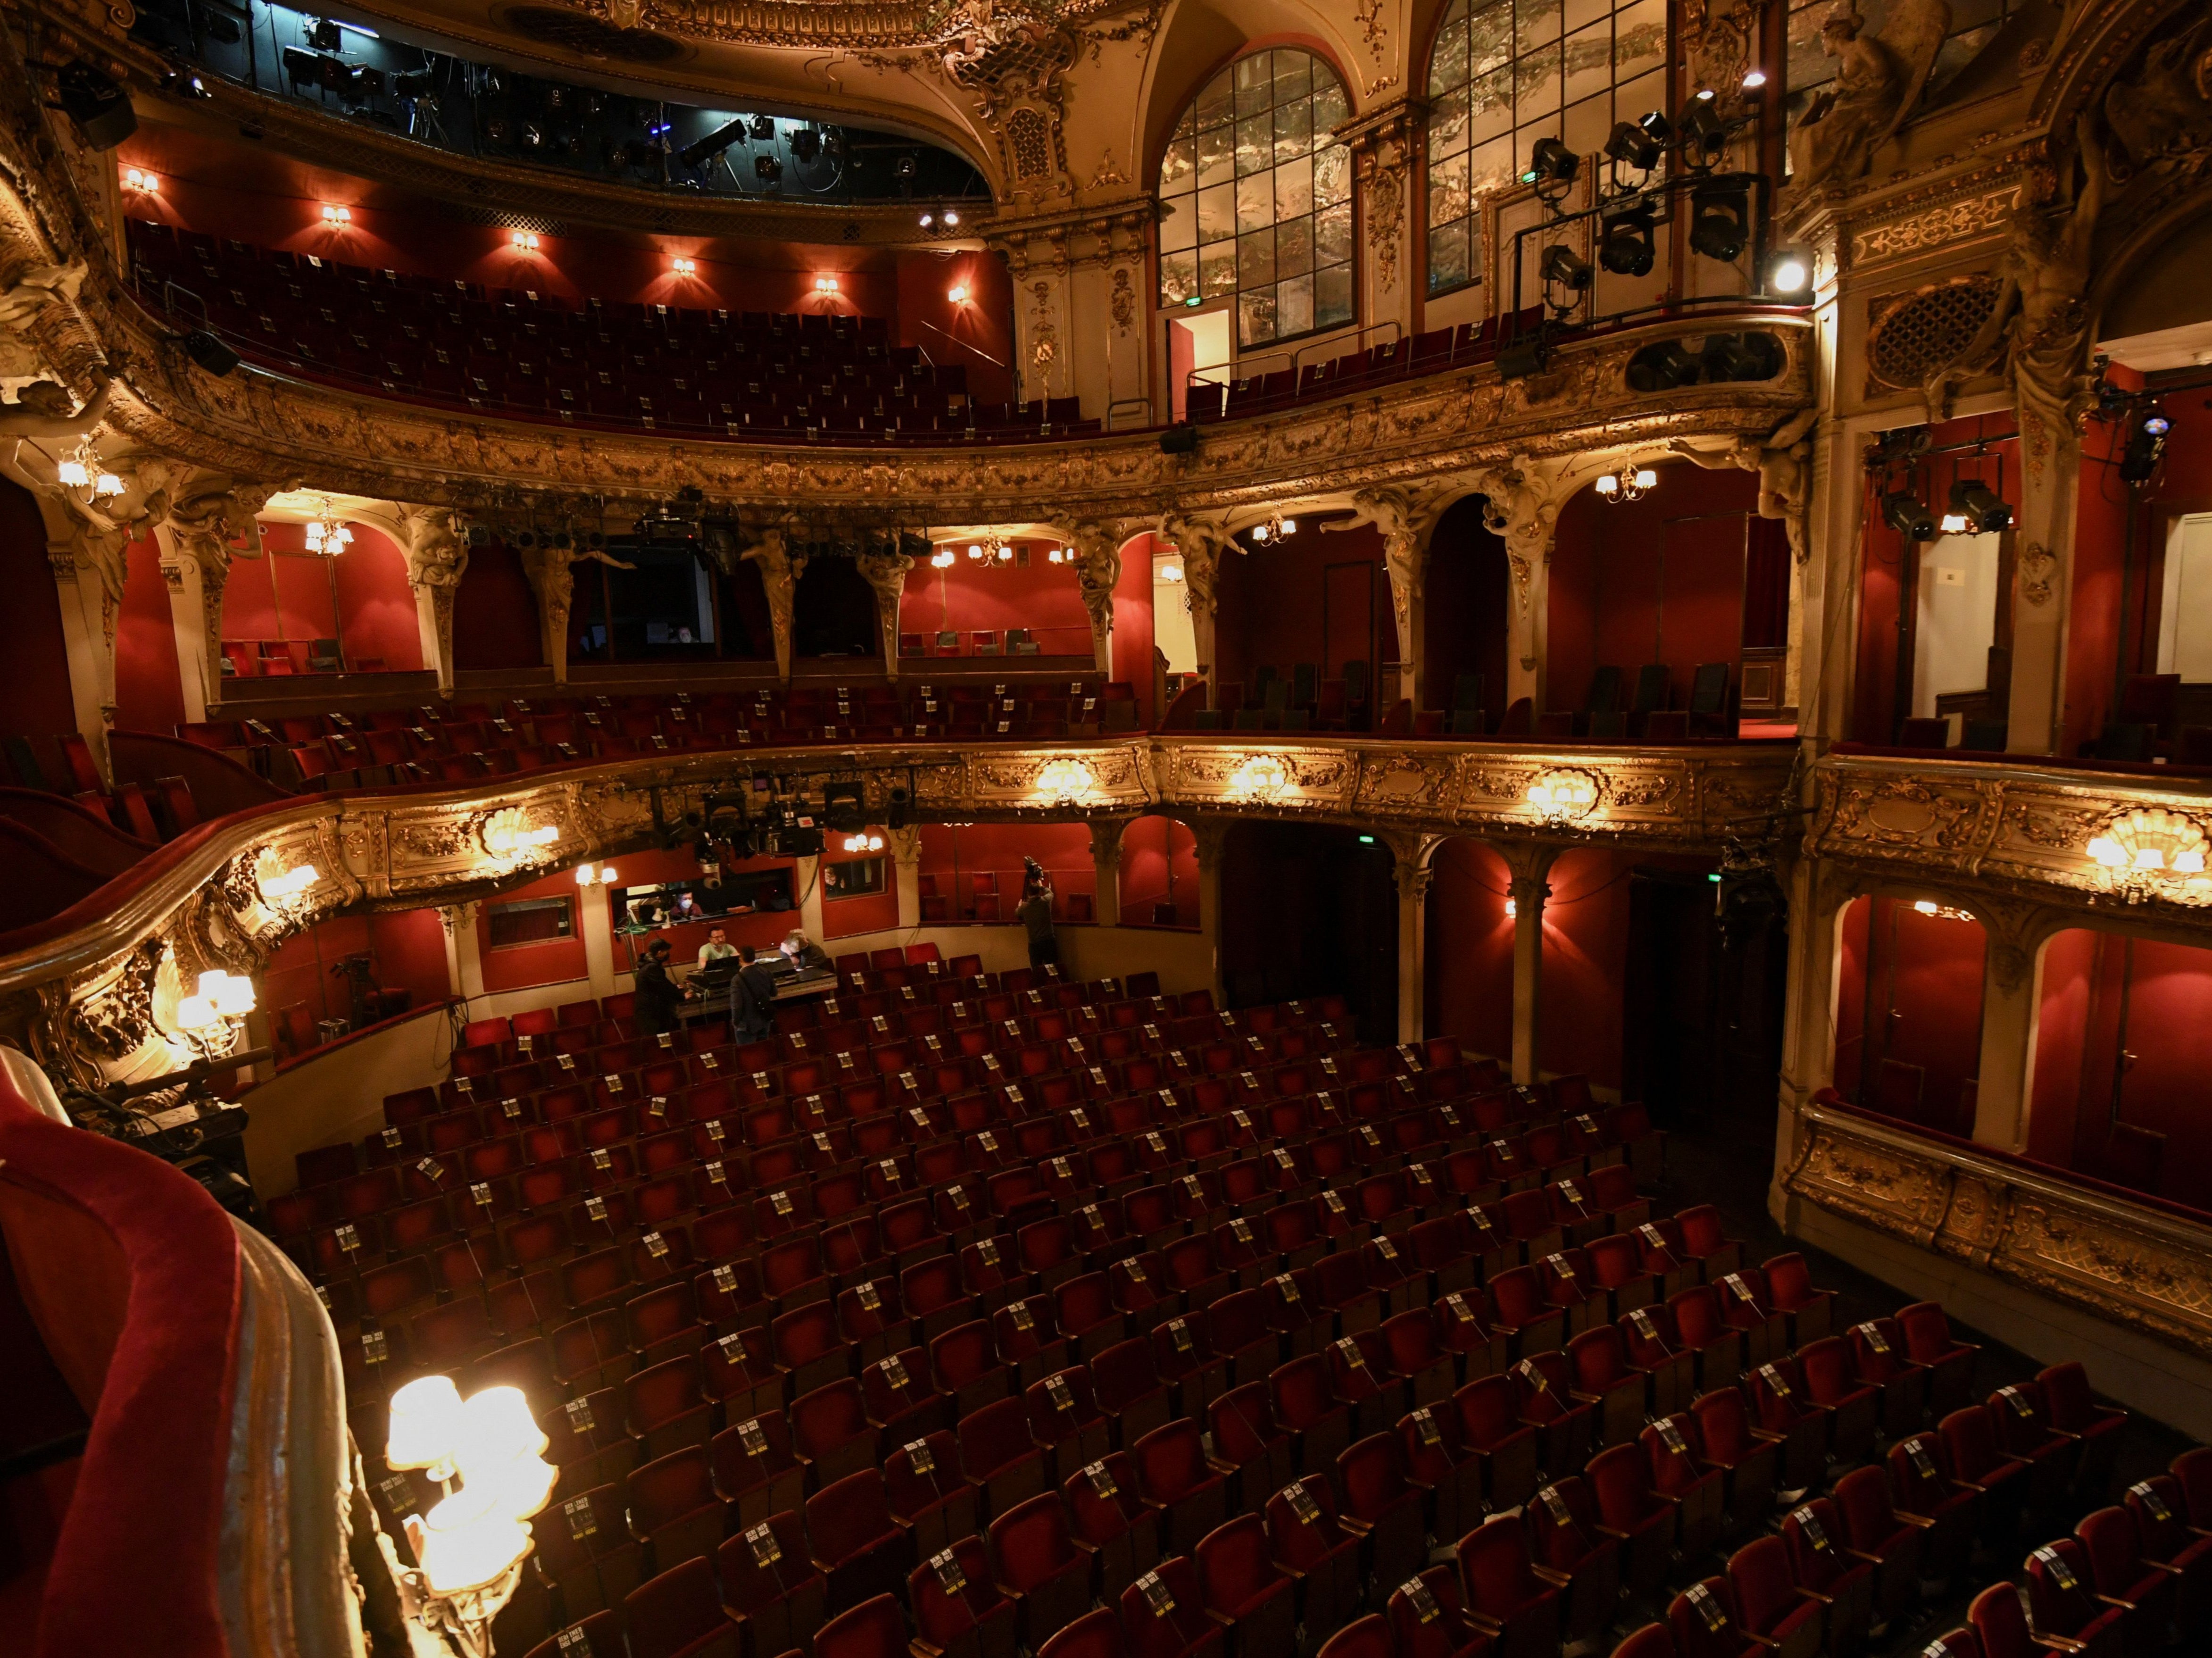 Theatres and venues haven’t been able to open fully for over a year